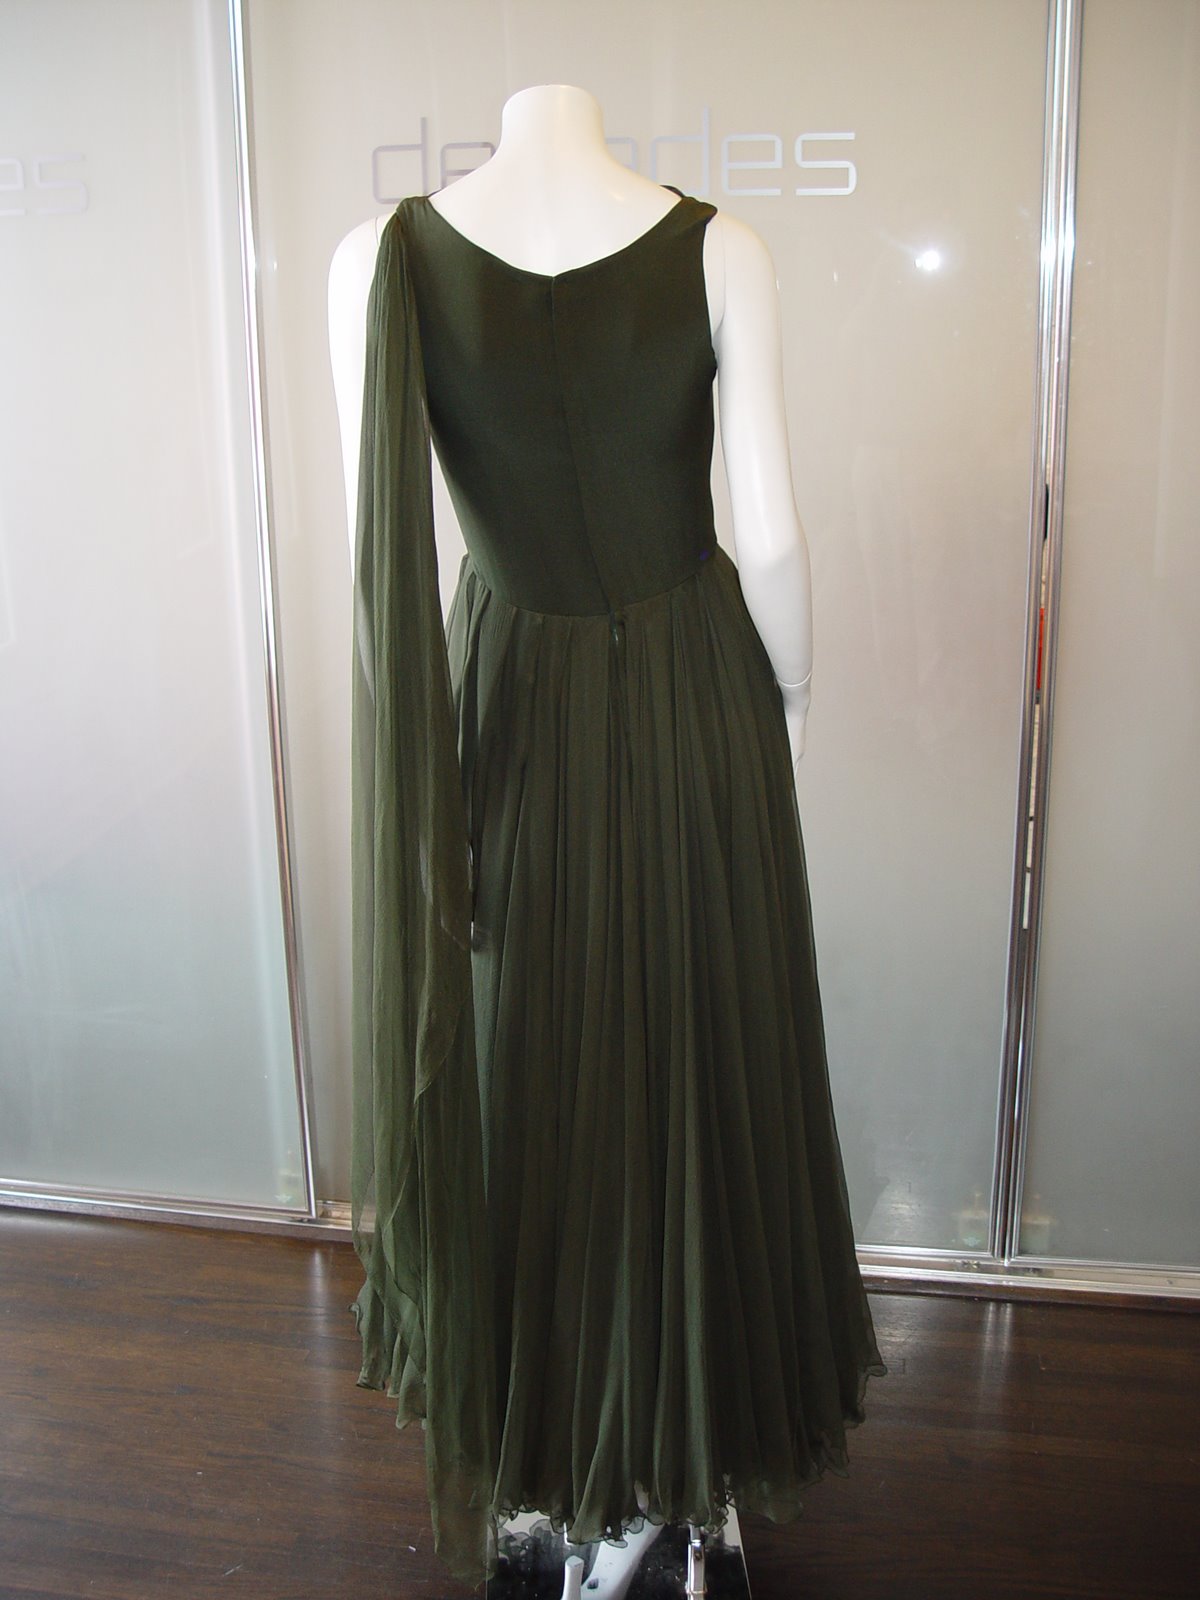 [JAMES+GALANOS+OLIVE+CHIFFON+BATEAU+NECK+LAYERED+GOWN+WITH+ATTACHED+SCARF+THROUGH+NECKLINE+C+LATE+1950S.JPG+(3).JPG]